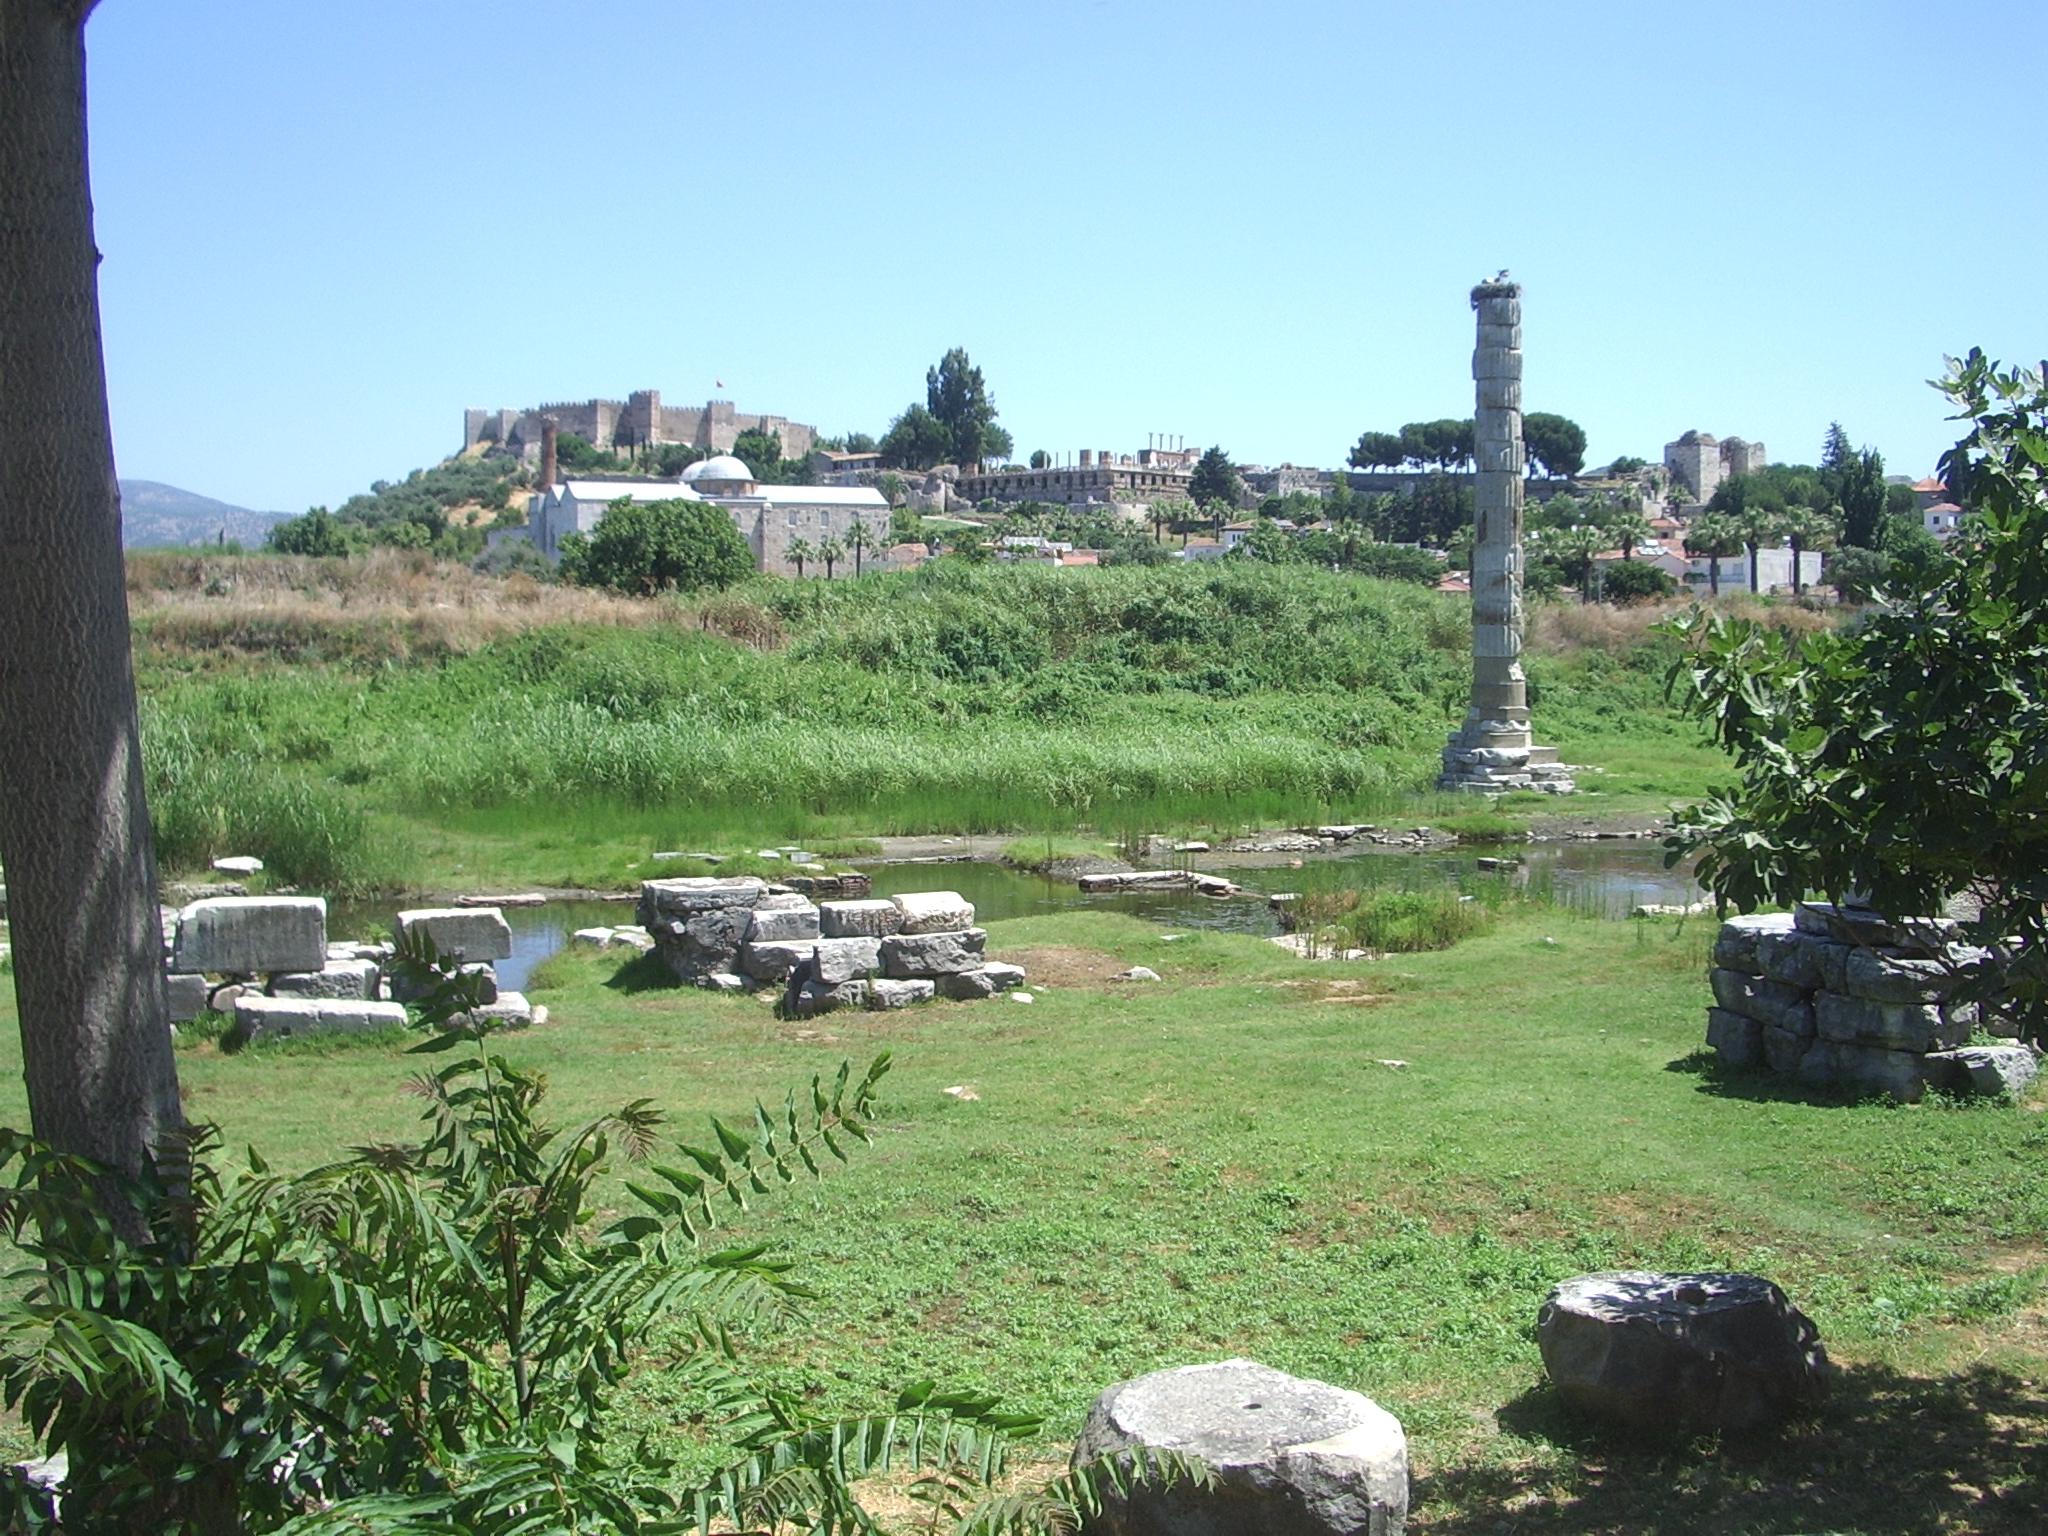 All that's left of The Temple of Artemis, one of the Seven Wonders of the Ancient World. Built 550BCE, rebuilt in 323BCE, destroyed probably in the 5th century CE. View from the garden of a rather nice bar/restaurant across the road. Selcuk, Turkey.